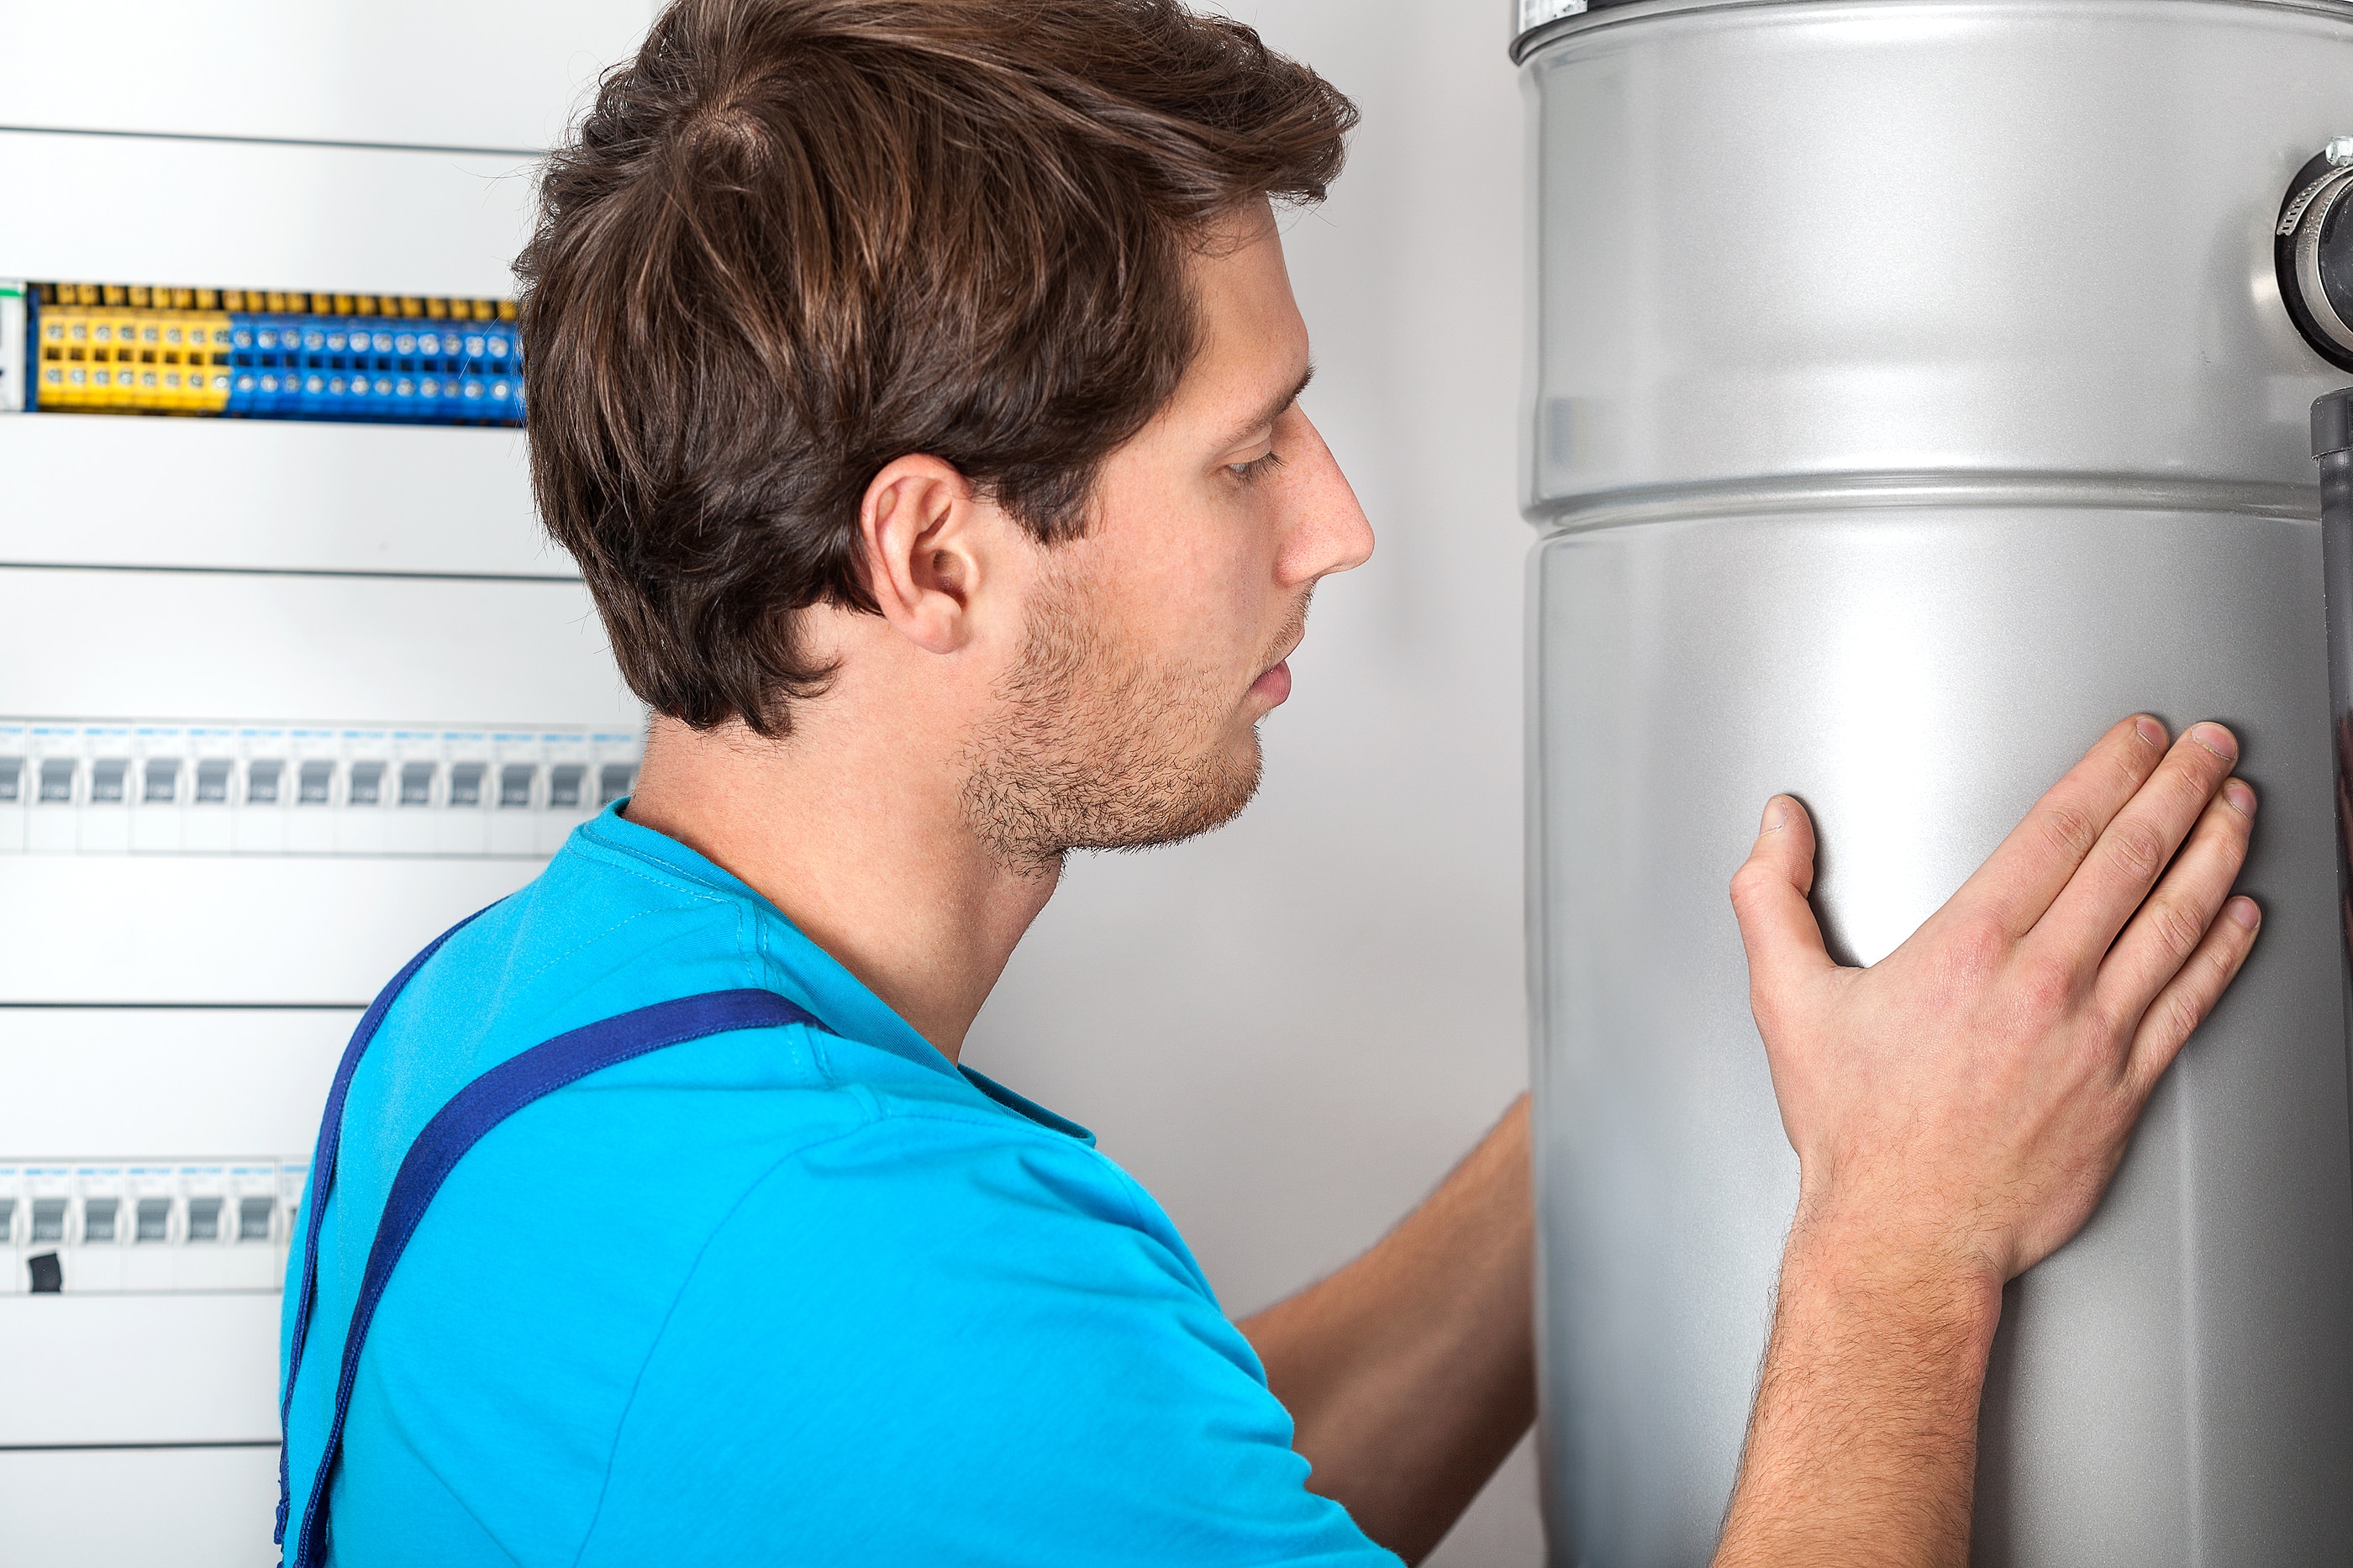 A Step-by-Step Guide to Draining Your Water Heater